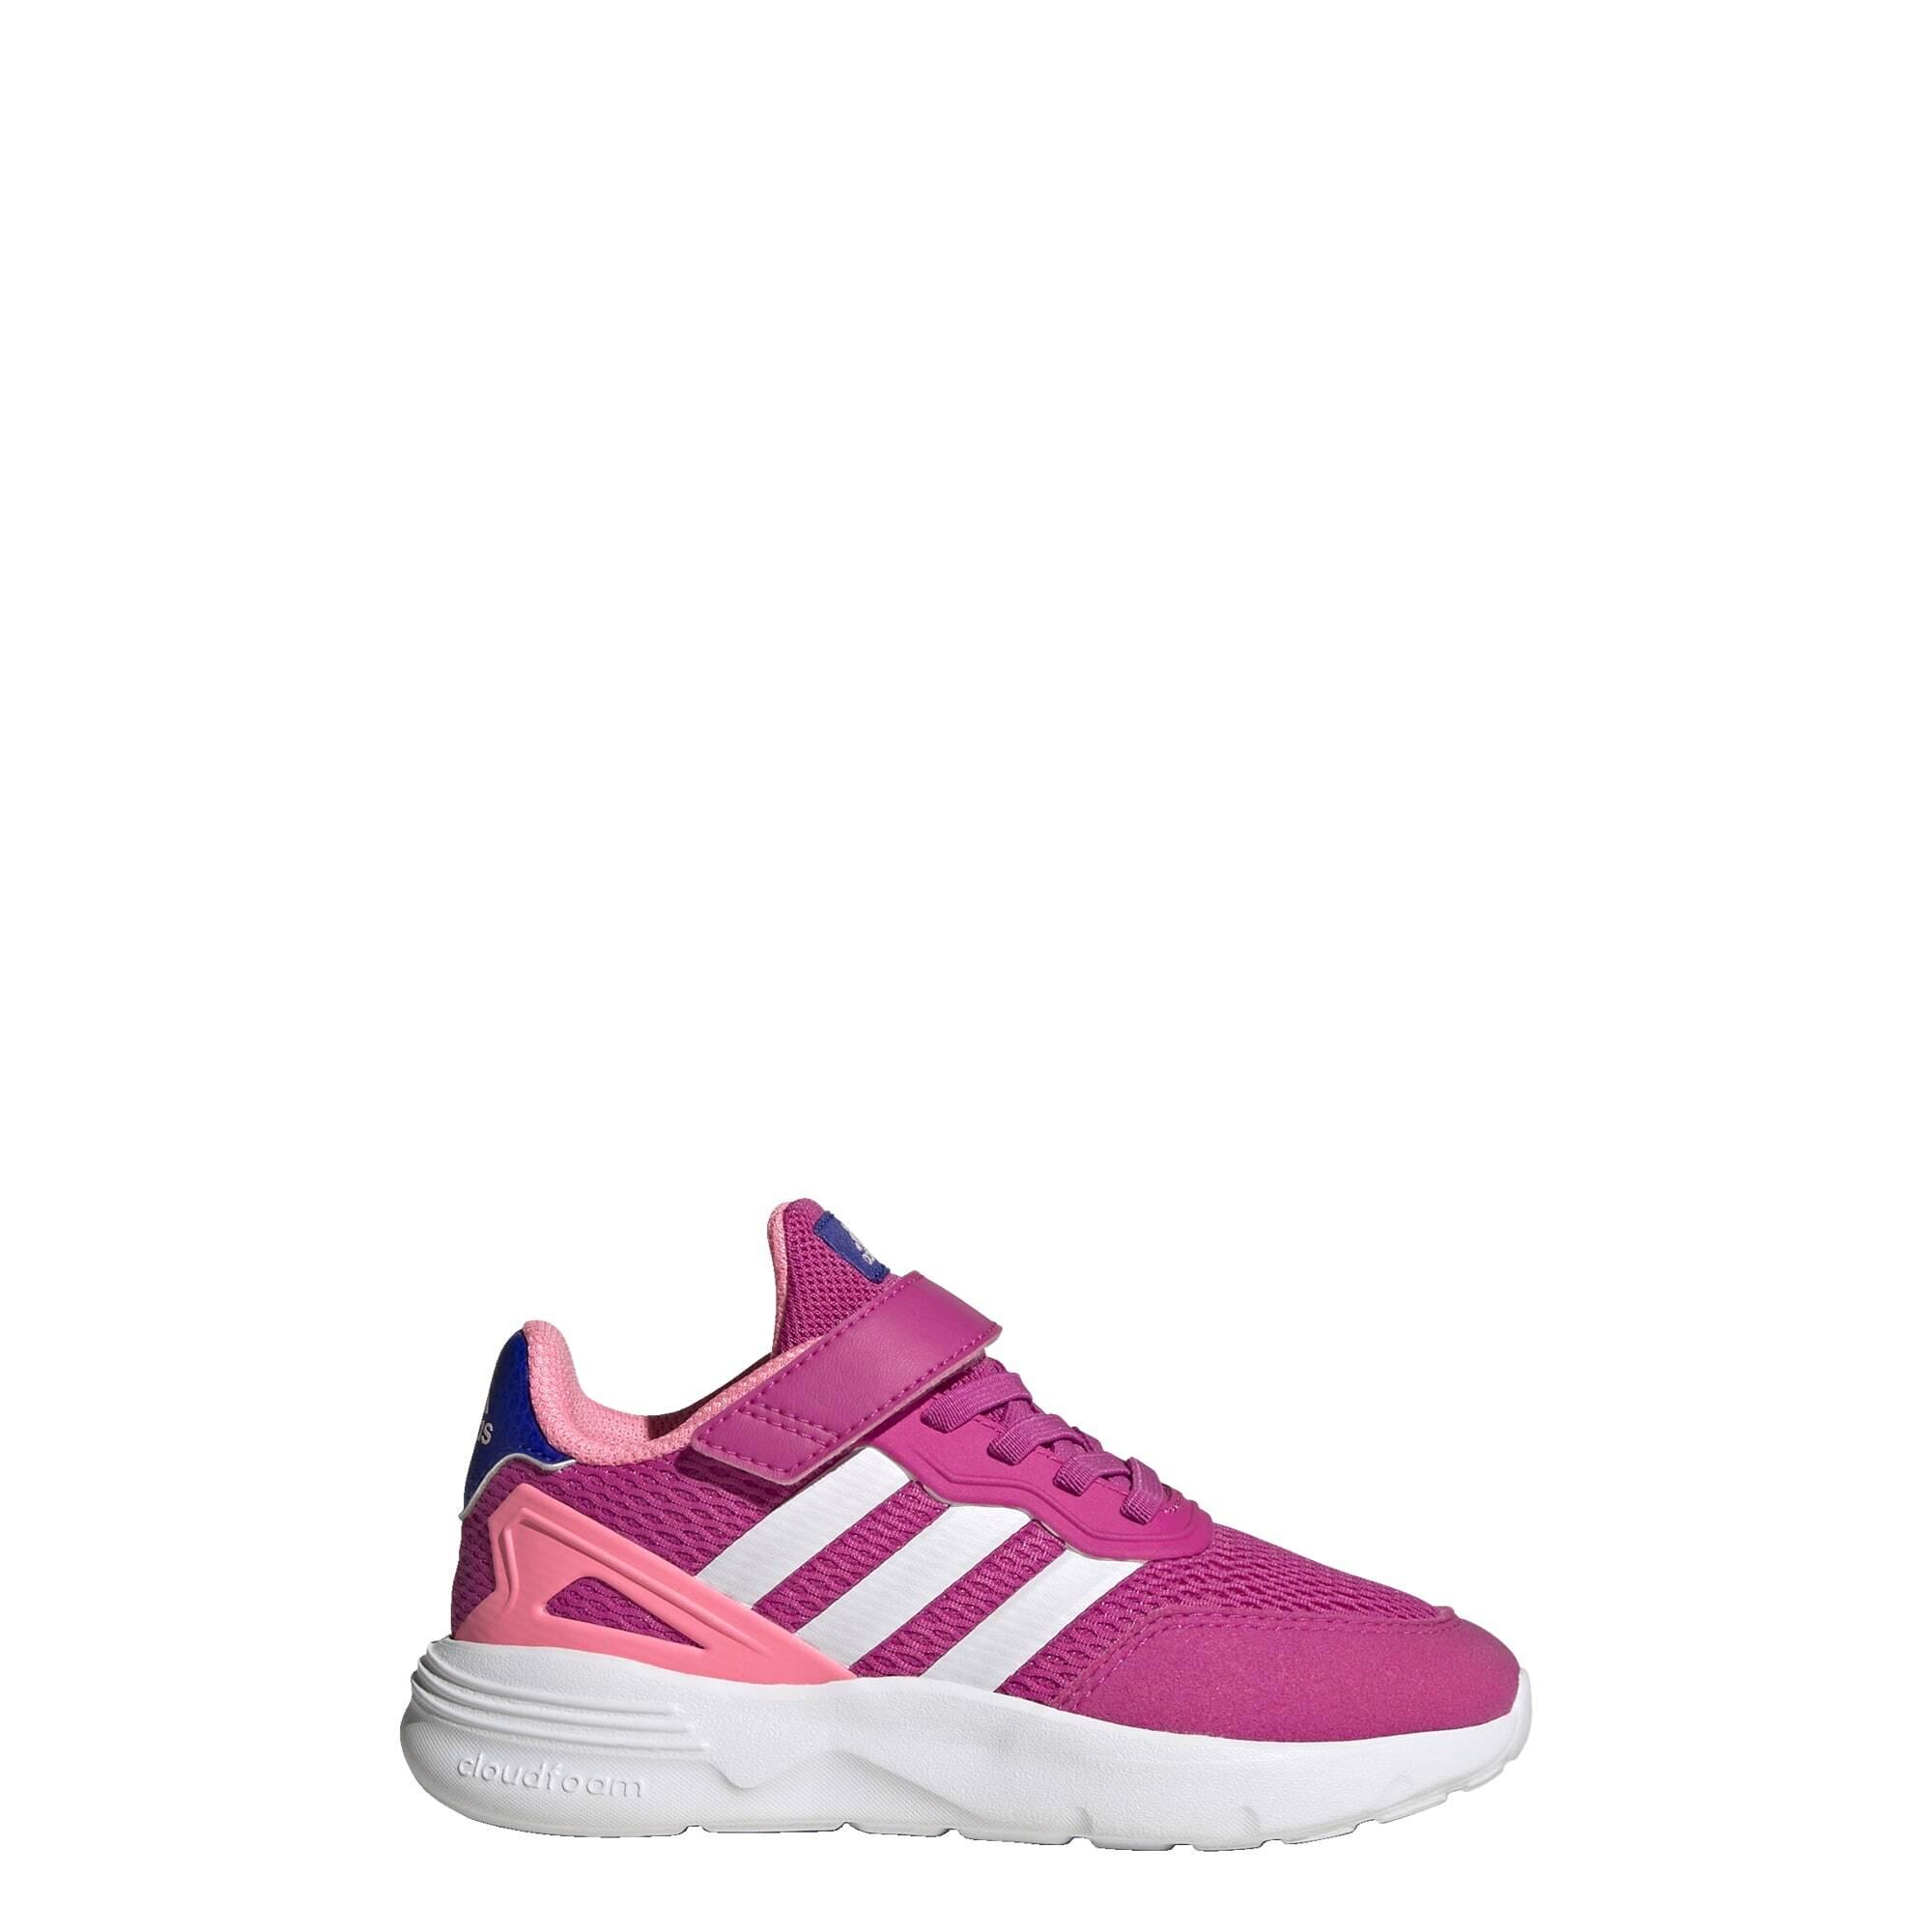 Nebzed Elastic Lace Top Strap Shoes ADIDAS